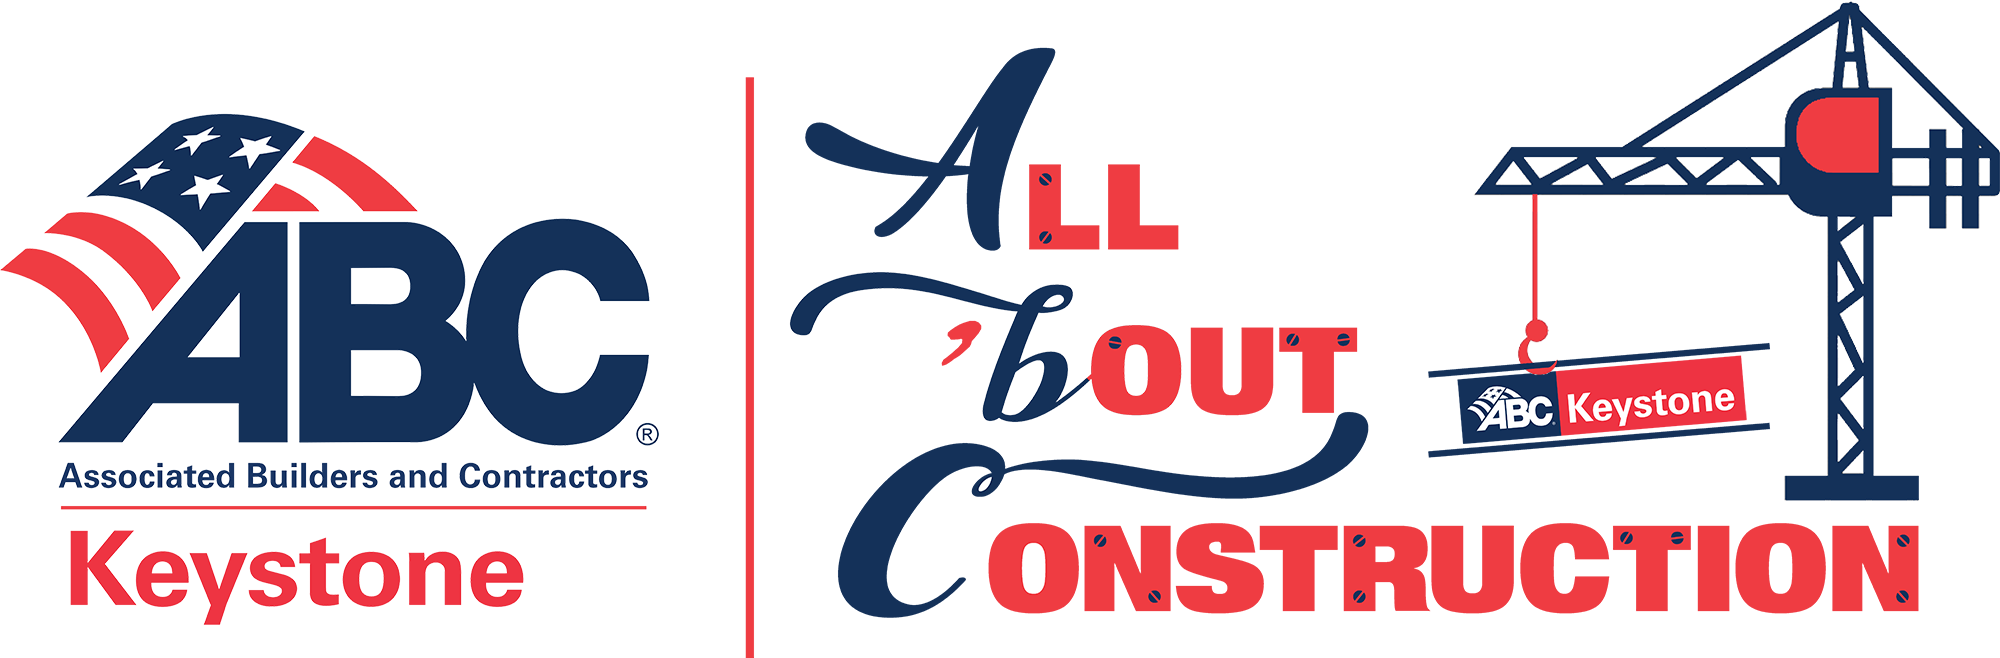 ABC Keystone - All bout Construction Camp Logo FINAL Color 2022